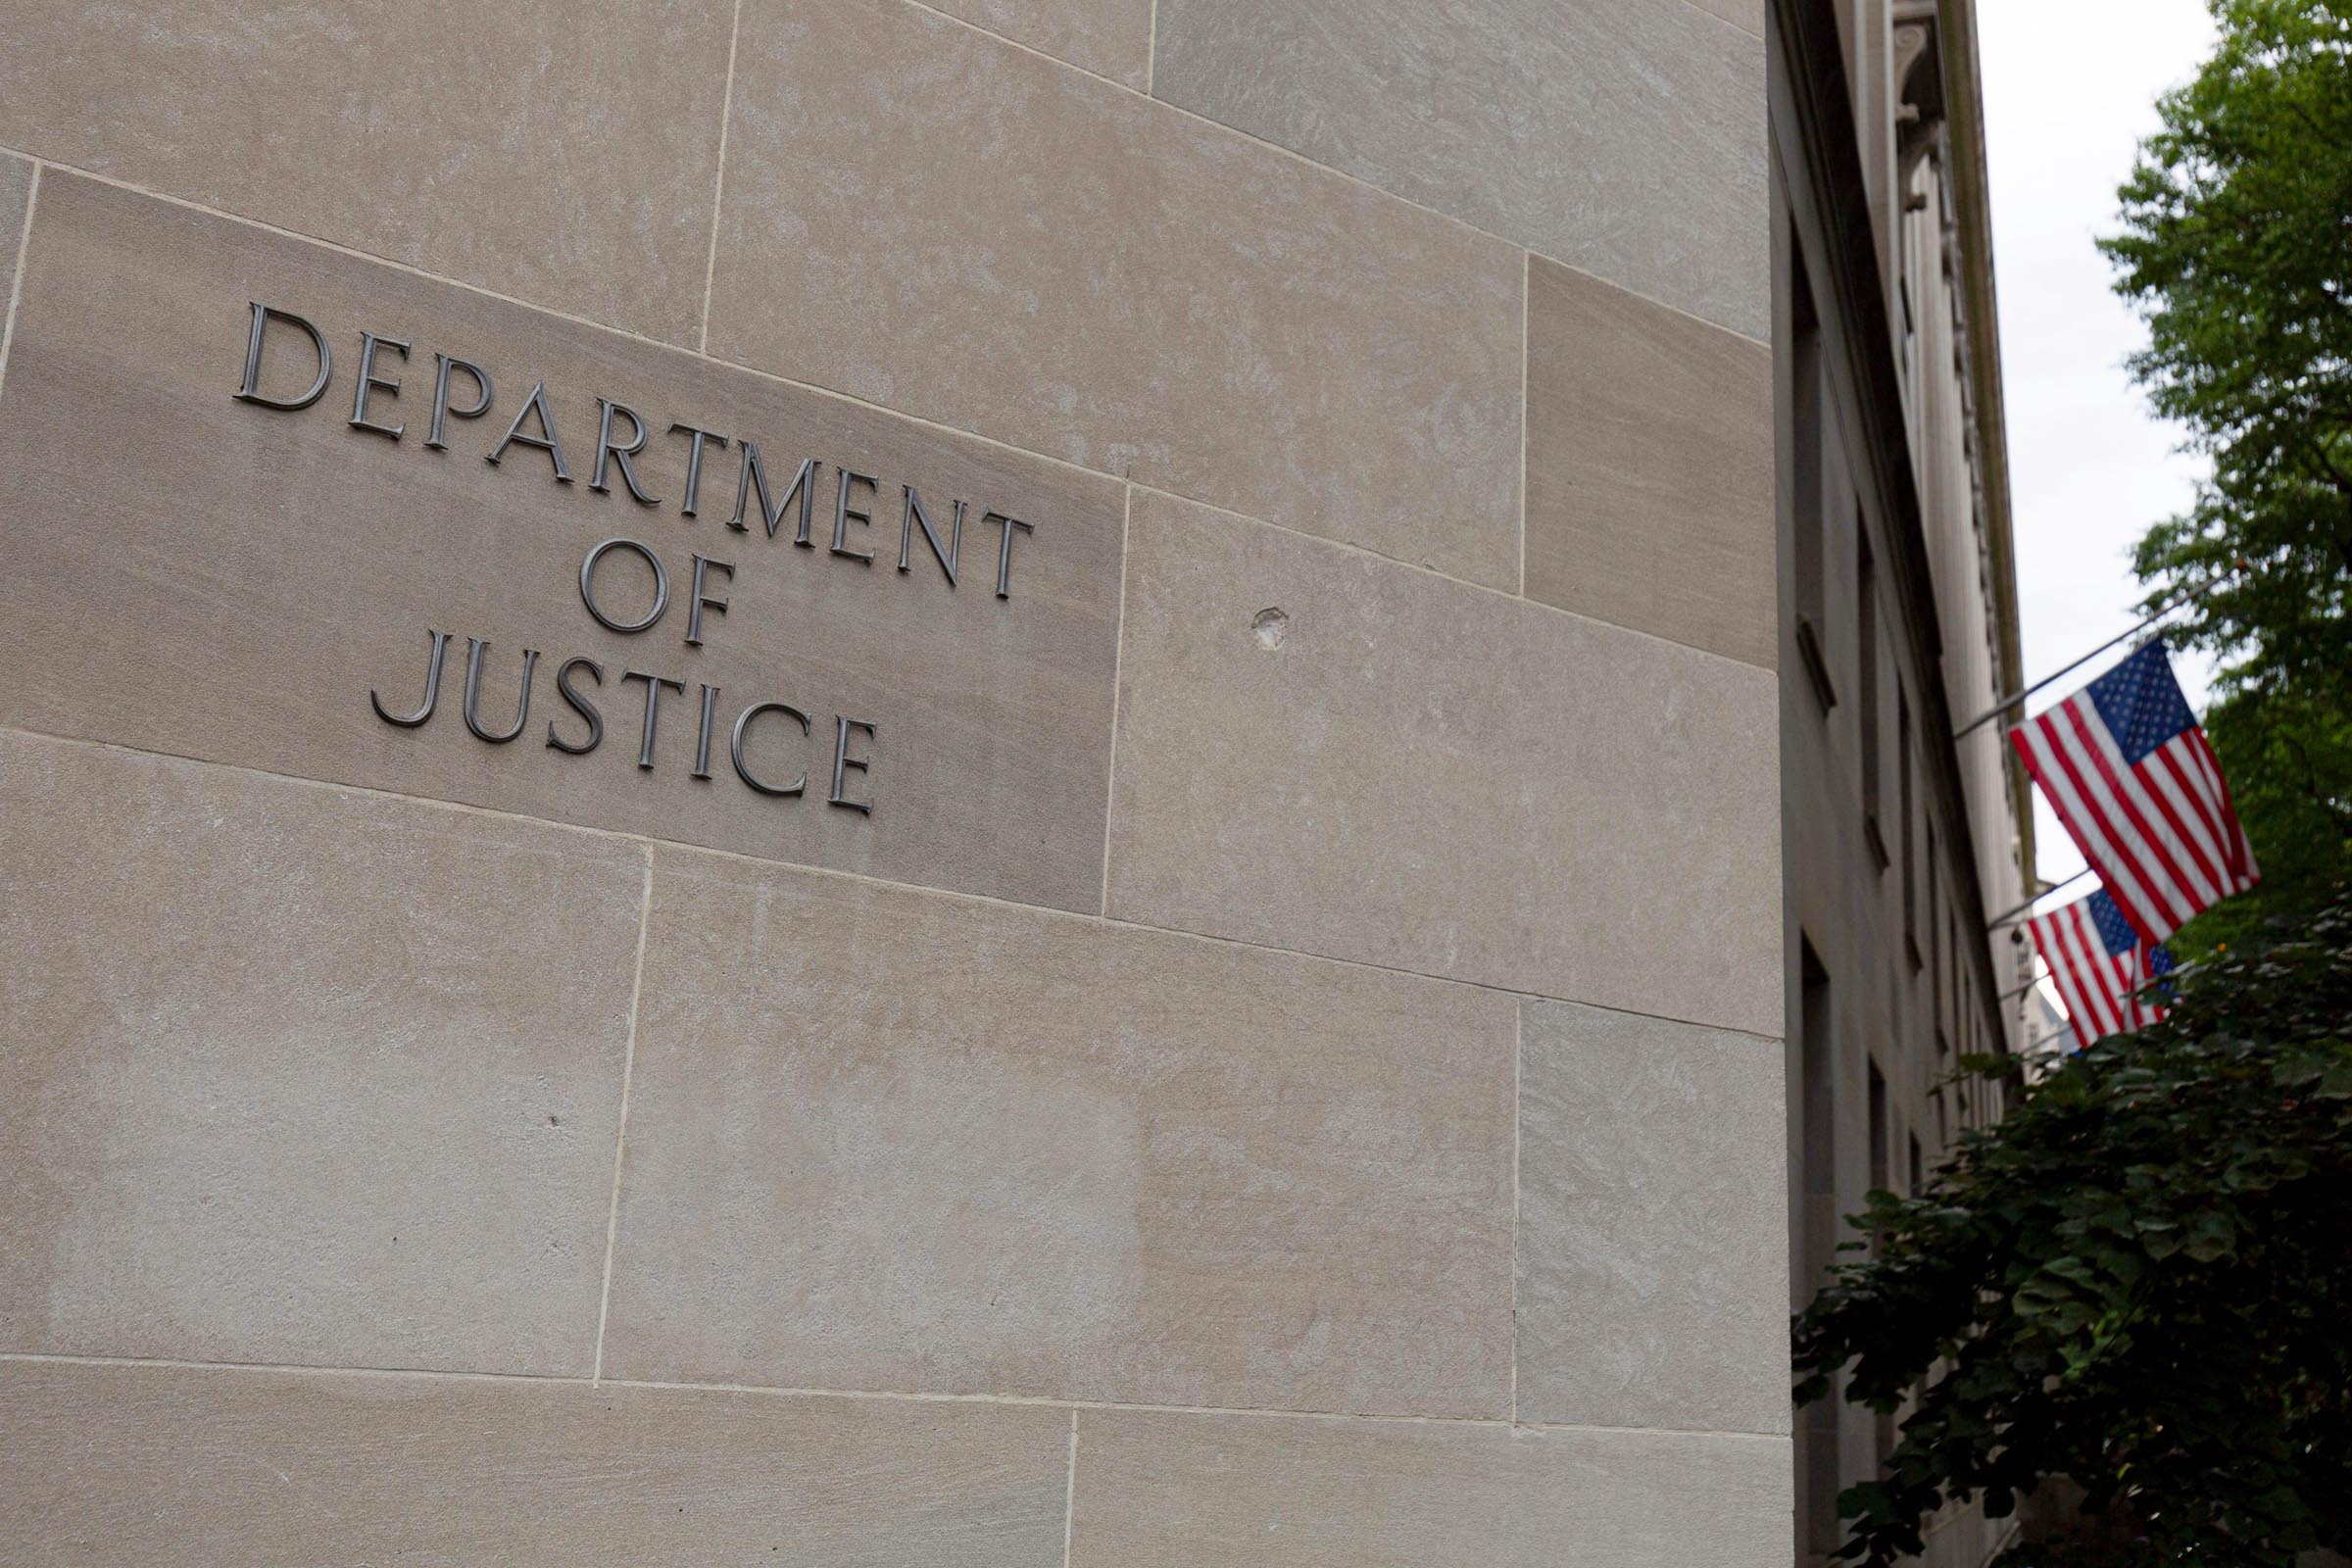 The US Department of Justice building in Washington, D.C., on July 22, 2019. (Alastair Pike—AFP/Getty Images)